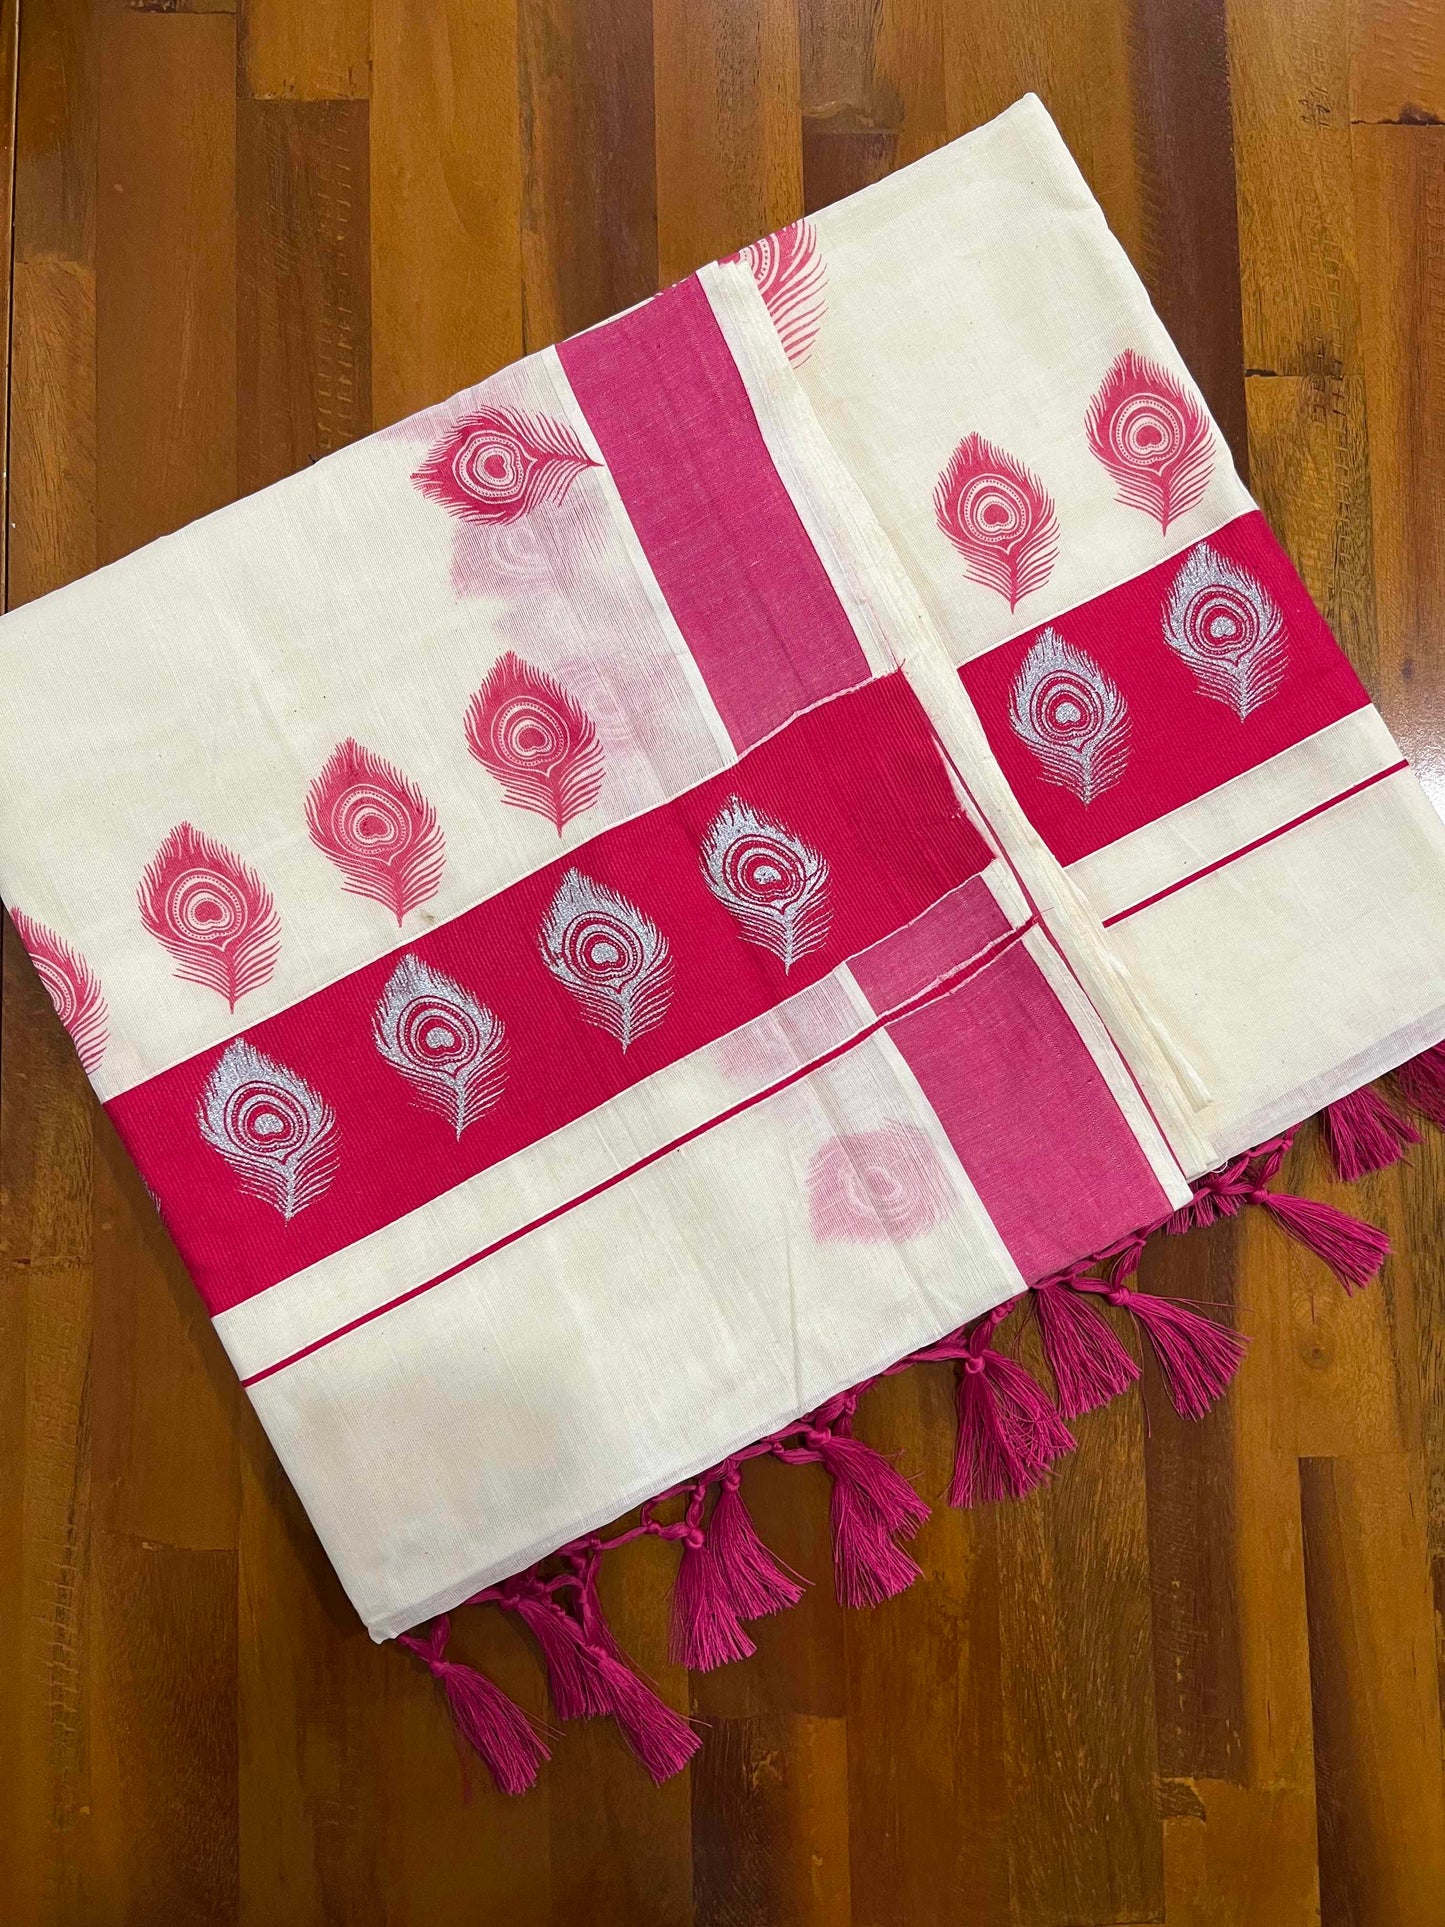 Off White Pure Cotton Kerala Saree with Peacock Feather Block Prints on Dark Pink Border and Tassels on Pallu